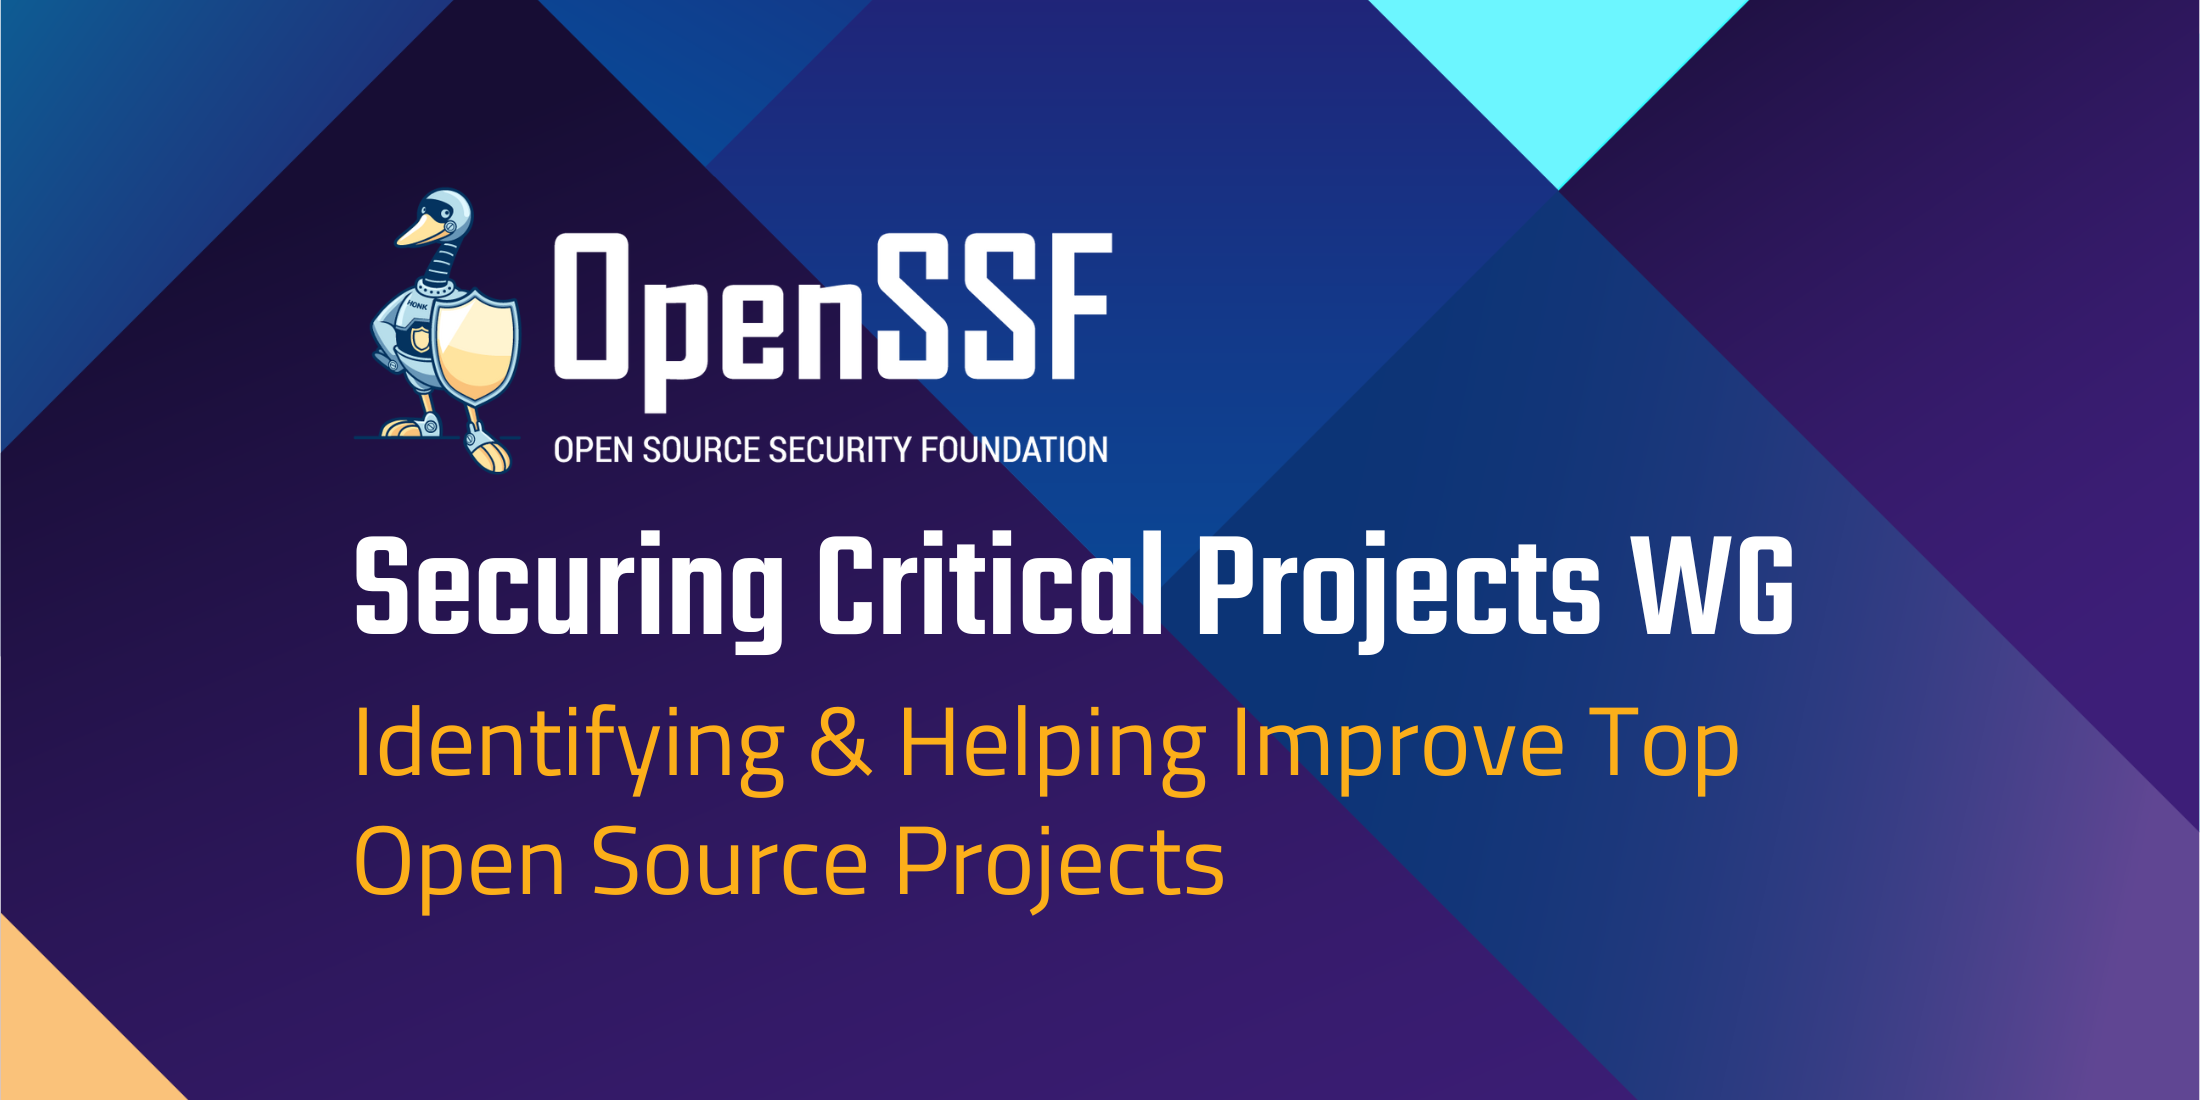 OpenSSF Securing Critical Projects Working Group